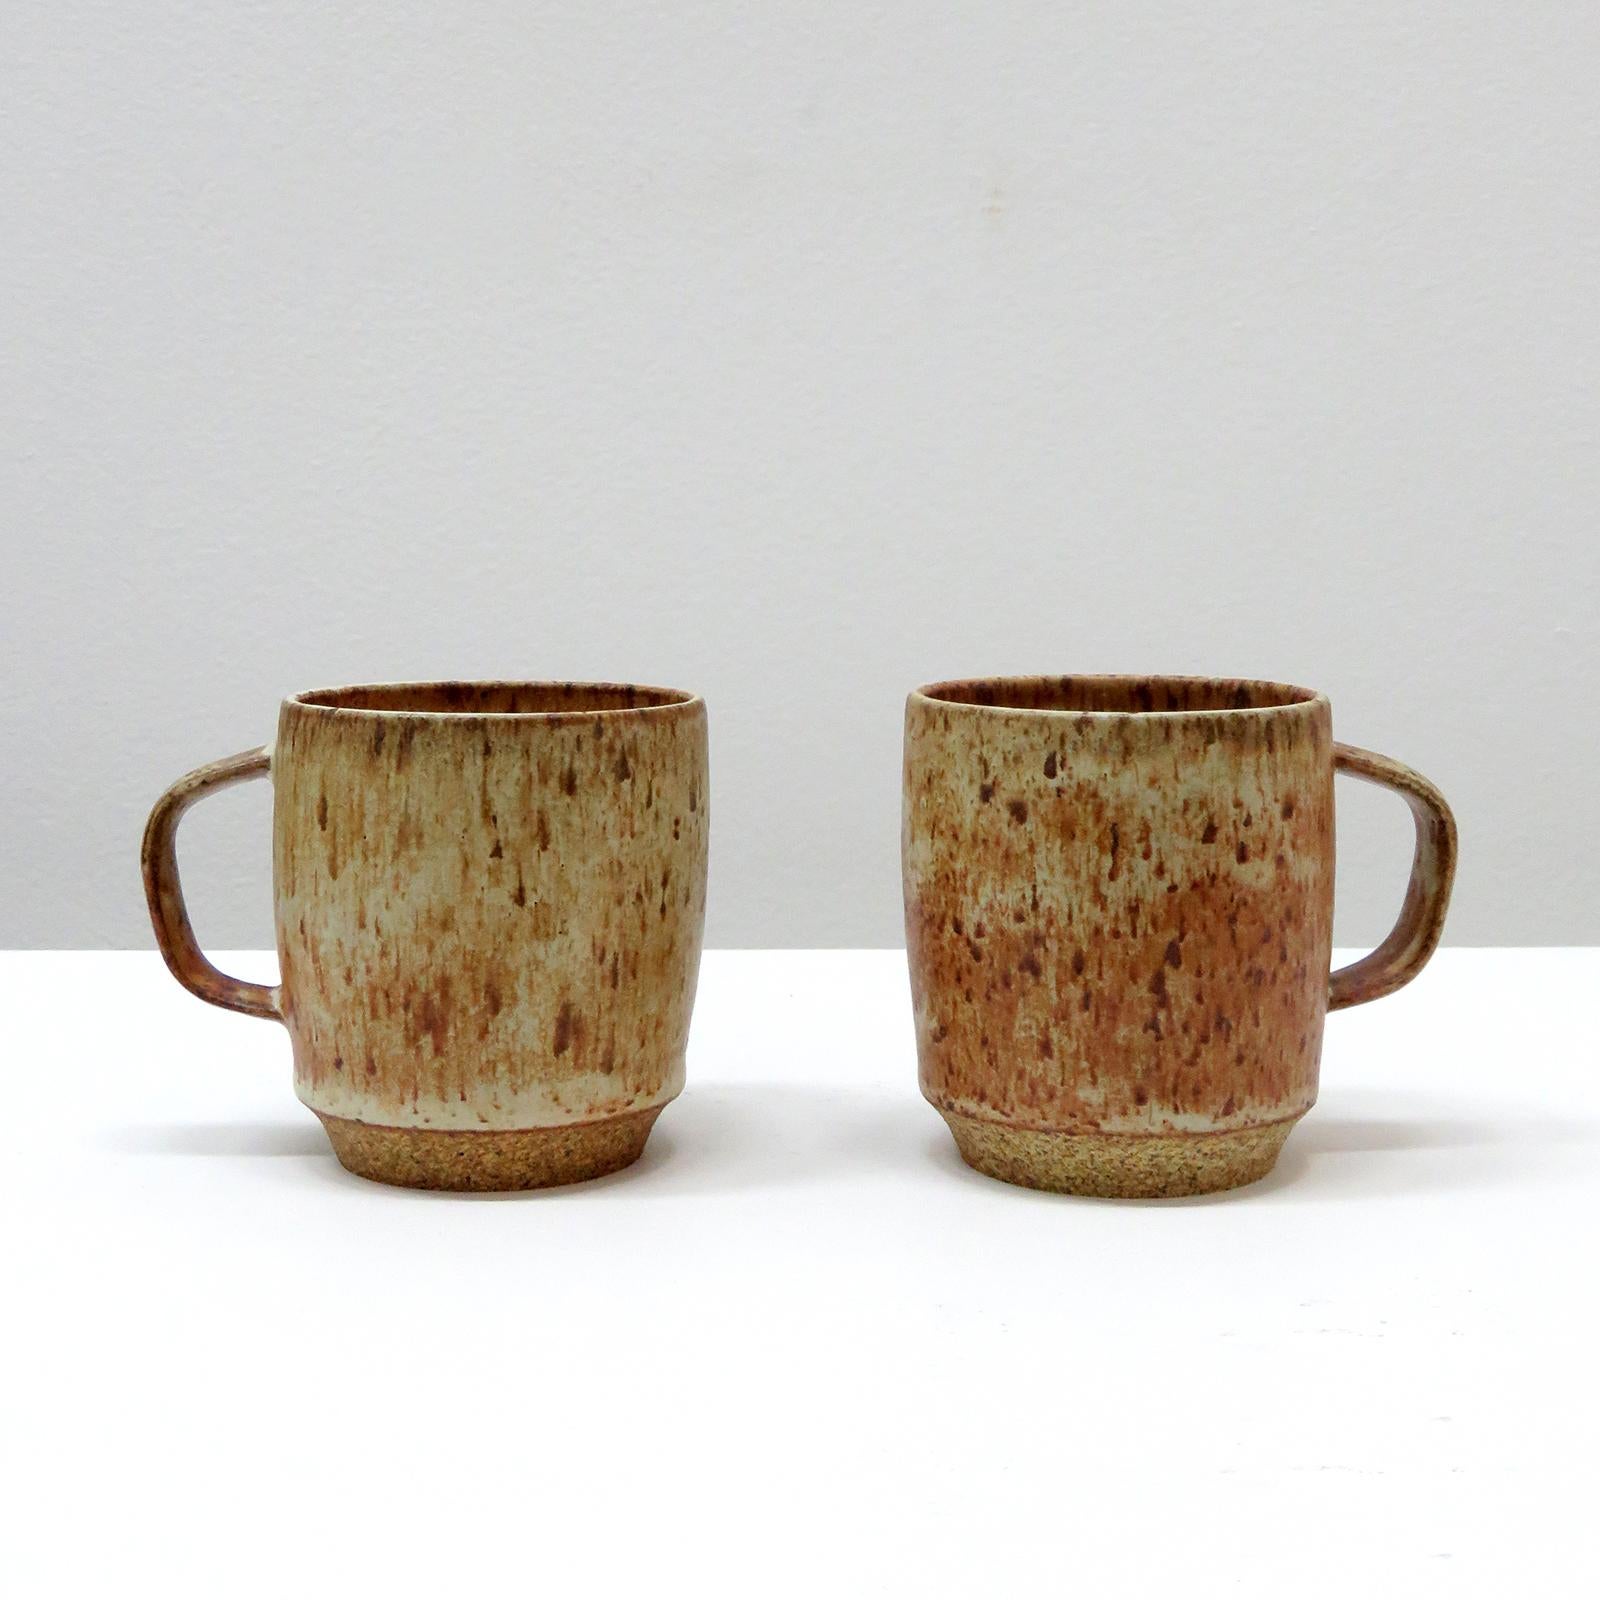 wonderful 'Carmel' coffee cups, handcrafted by Los Angeles based ceramicist Jed Farlow. High fired stoneware with matte 'toasted orange' glaze. Designed with a human-centered approach in mind, these stackable mugs are thoughtfully detailed to make a